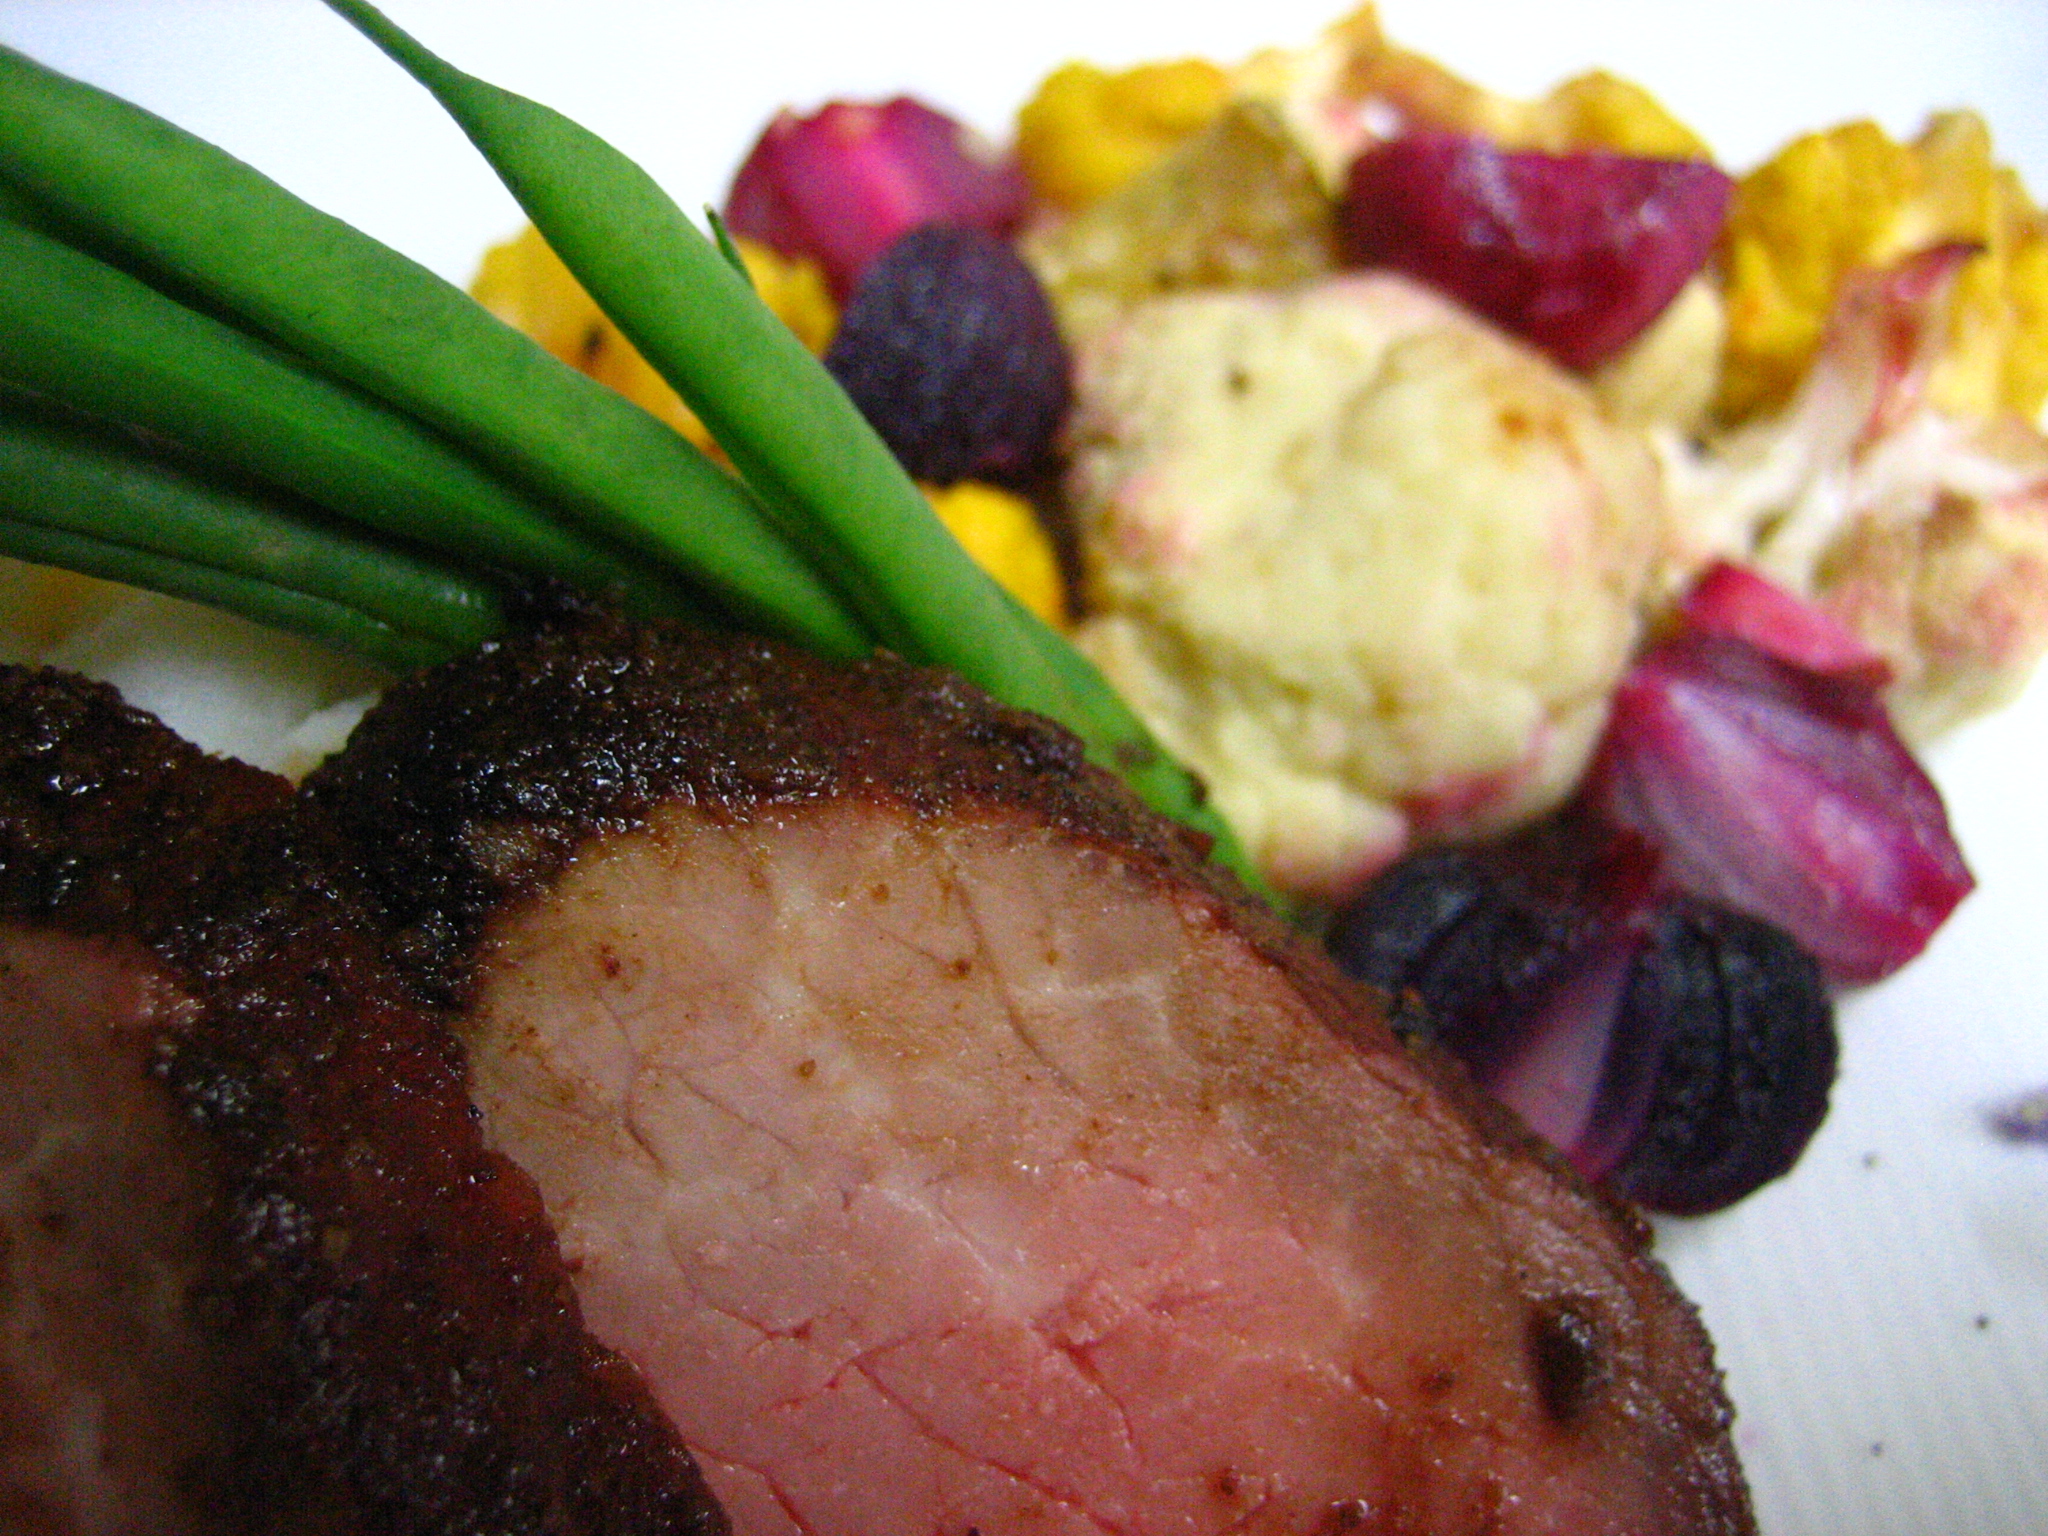 Filet with tri-color cauliflower